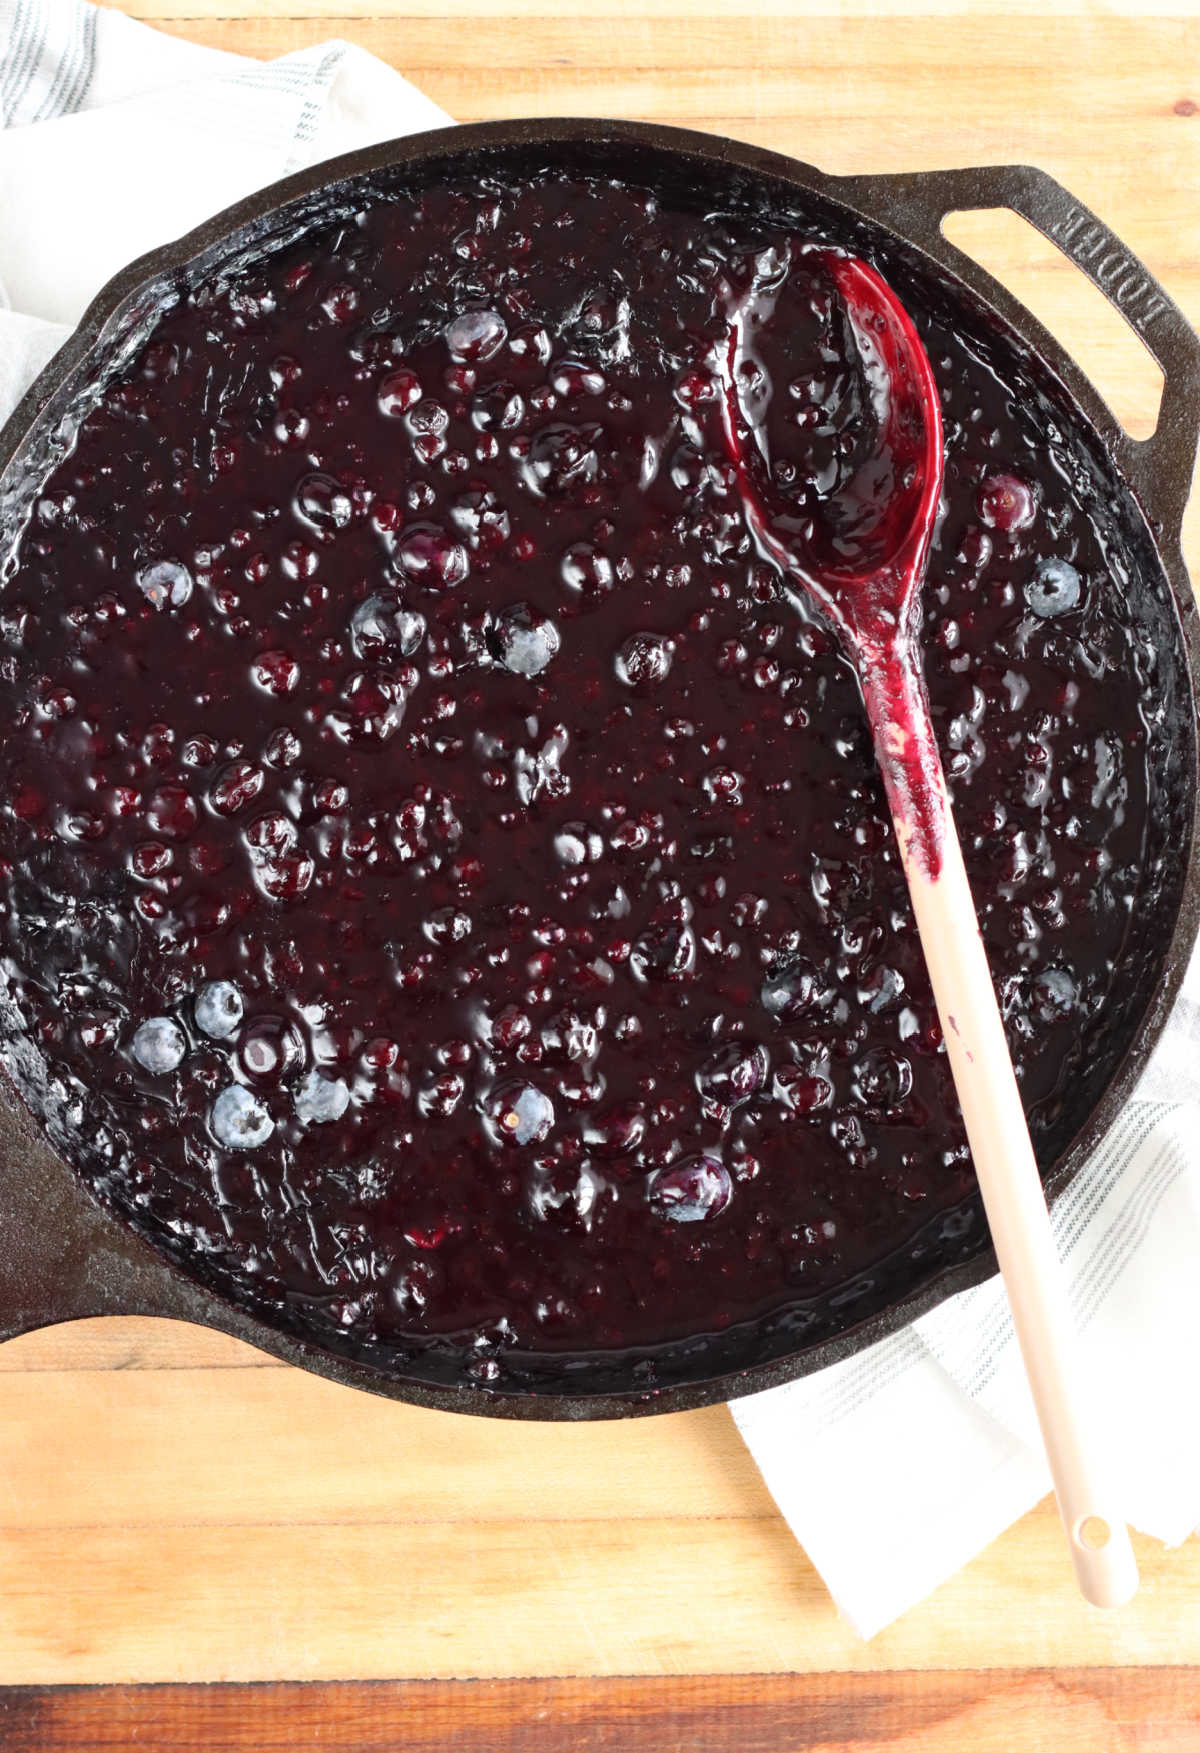 Blueberry pie filling in large cast iron skillet with spoon in skillet on butcher block.